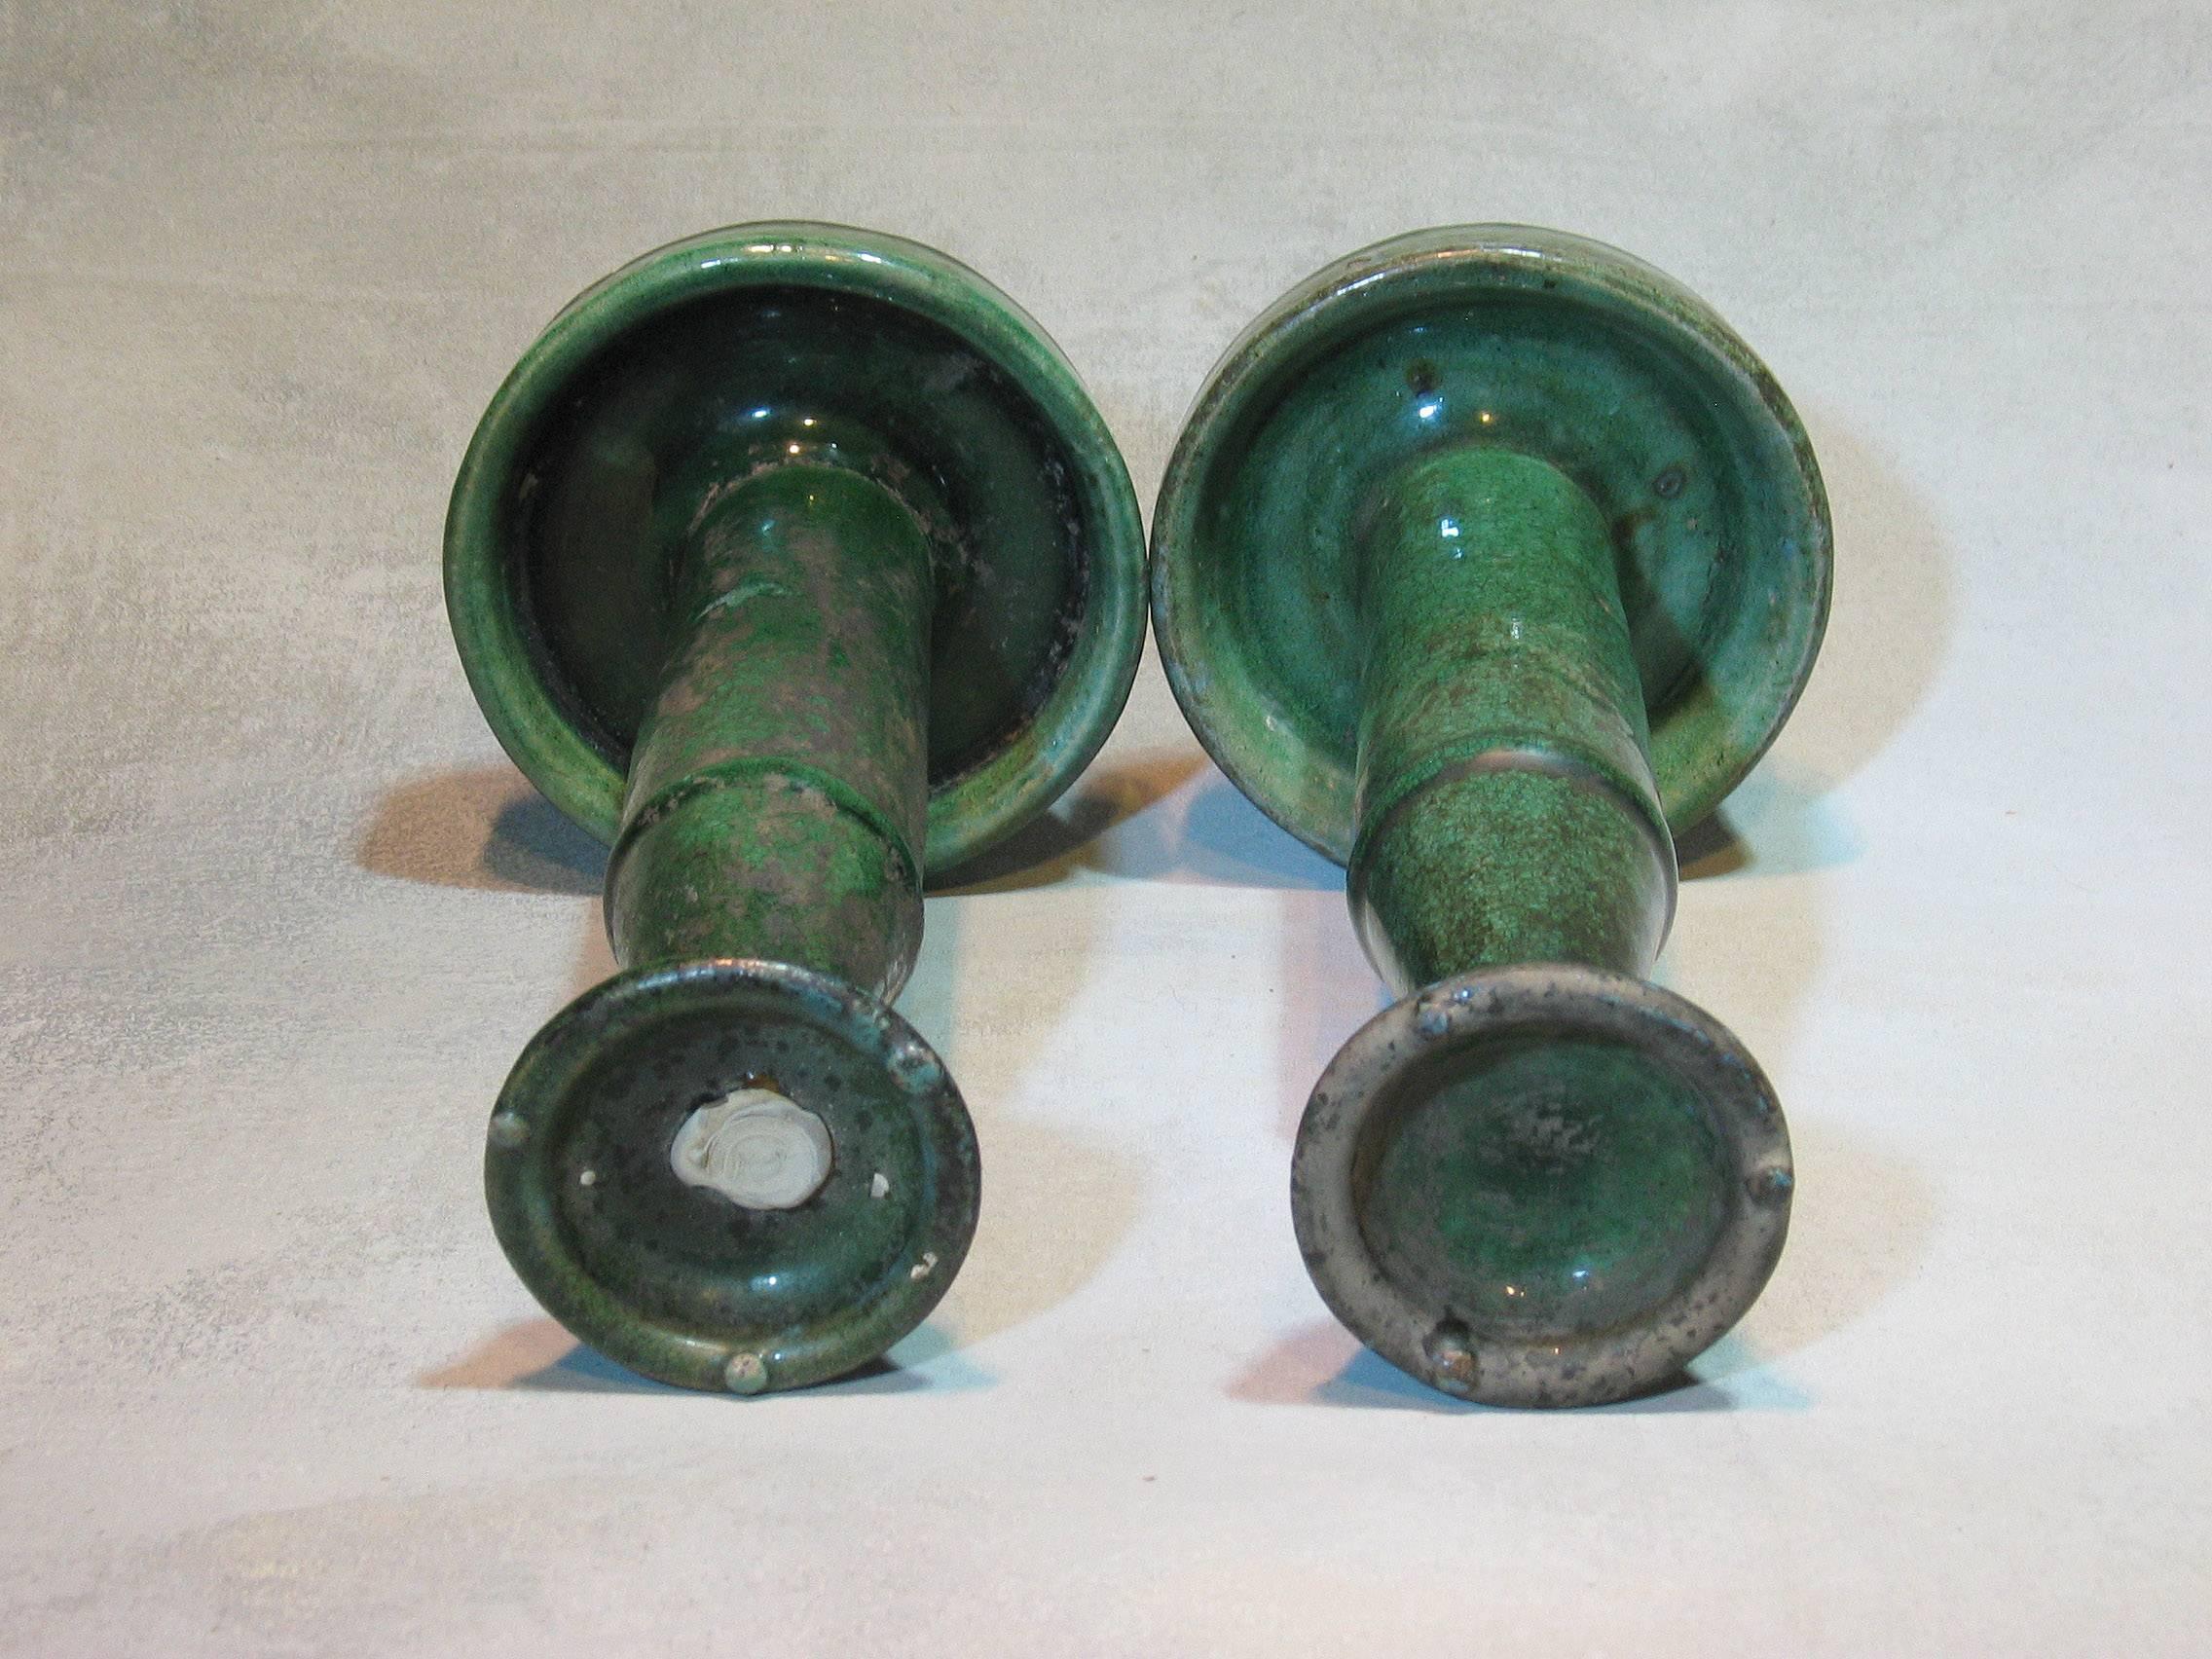 Shiwan pottery oil lamps late qing dynasty or earlier, South Chinese, two-pieces, with saucer base, hollow cylinder column tapering to a cup with three spurs. Thick crackled glaze pooling at the base. The taller of the lamps with makers for